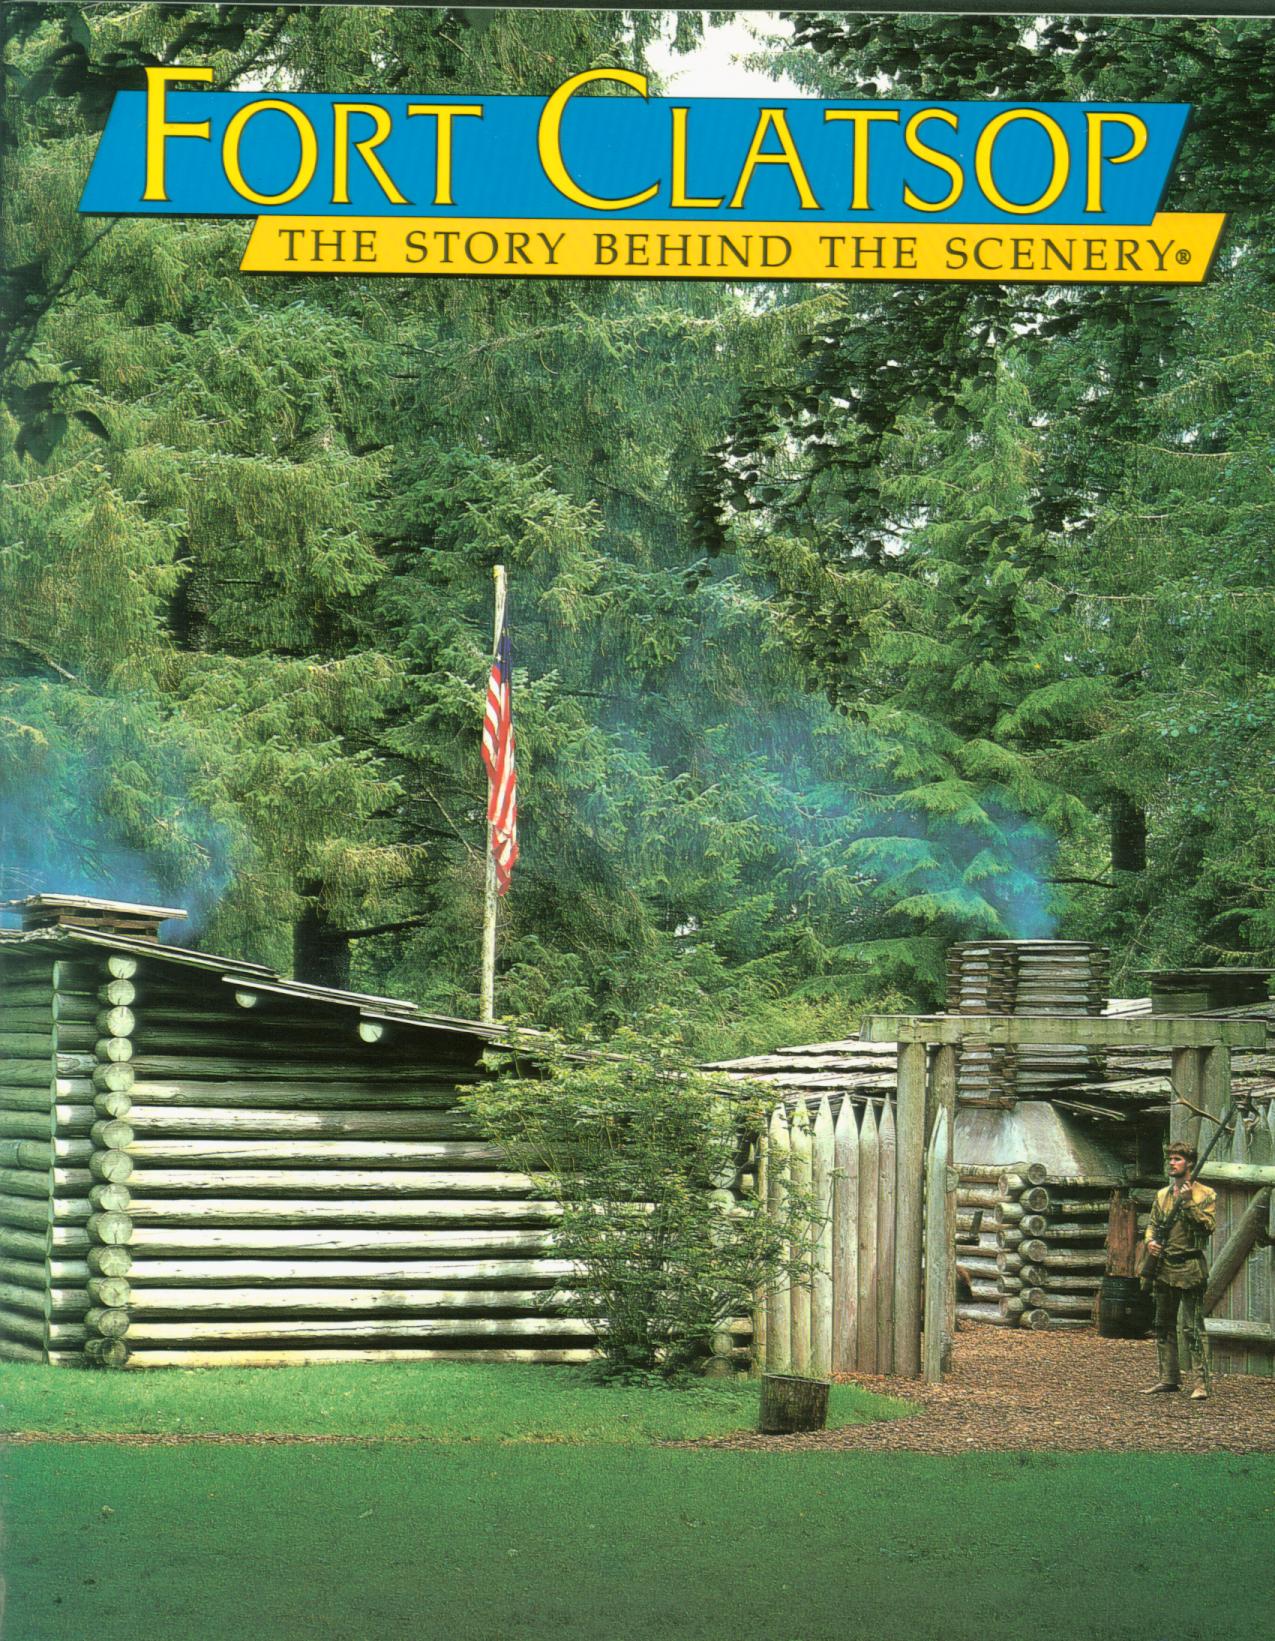 FORT CLATSOP: the story behind the scenery (OR).